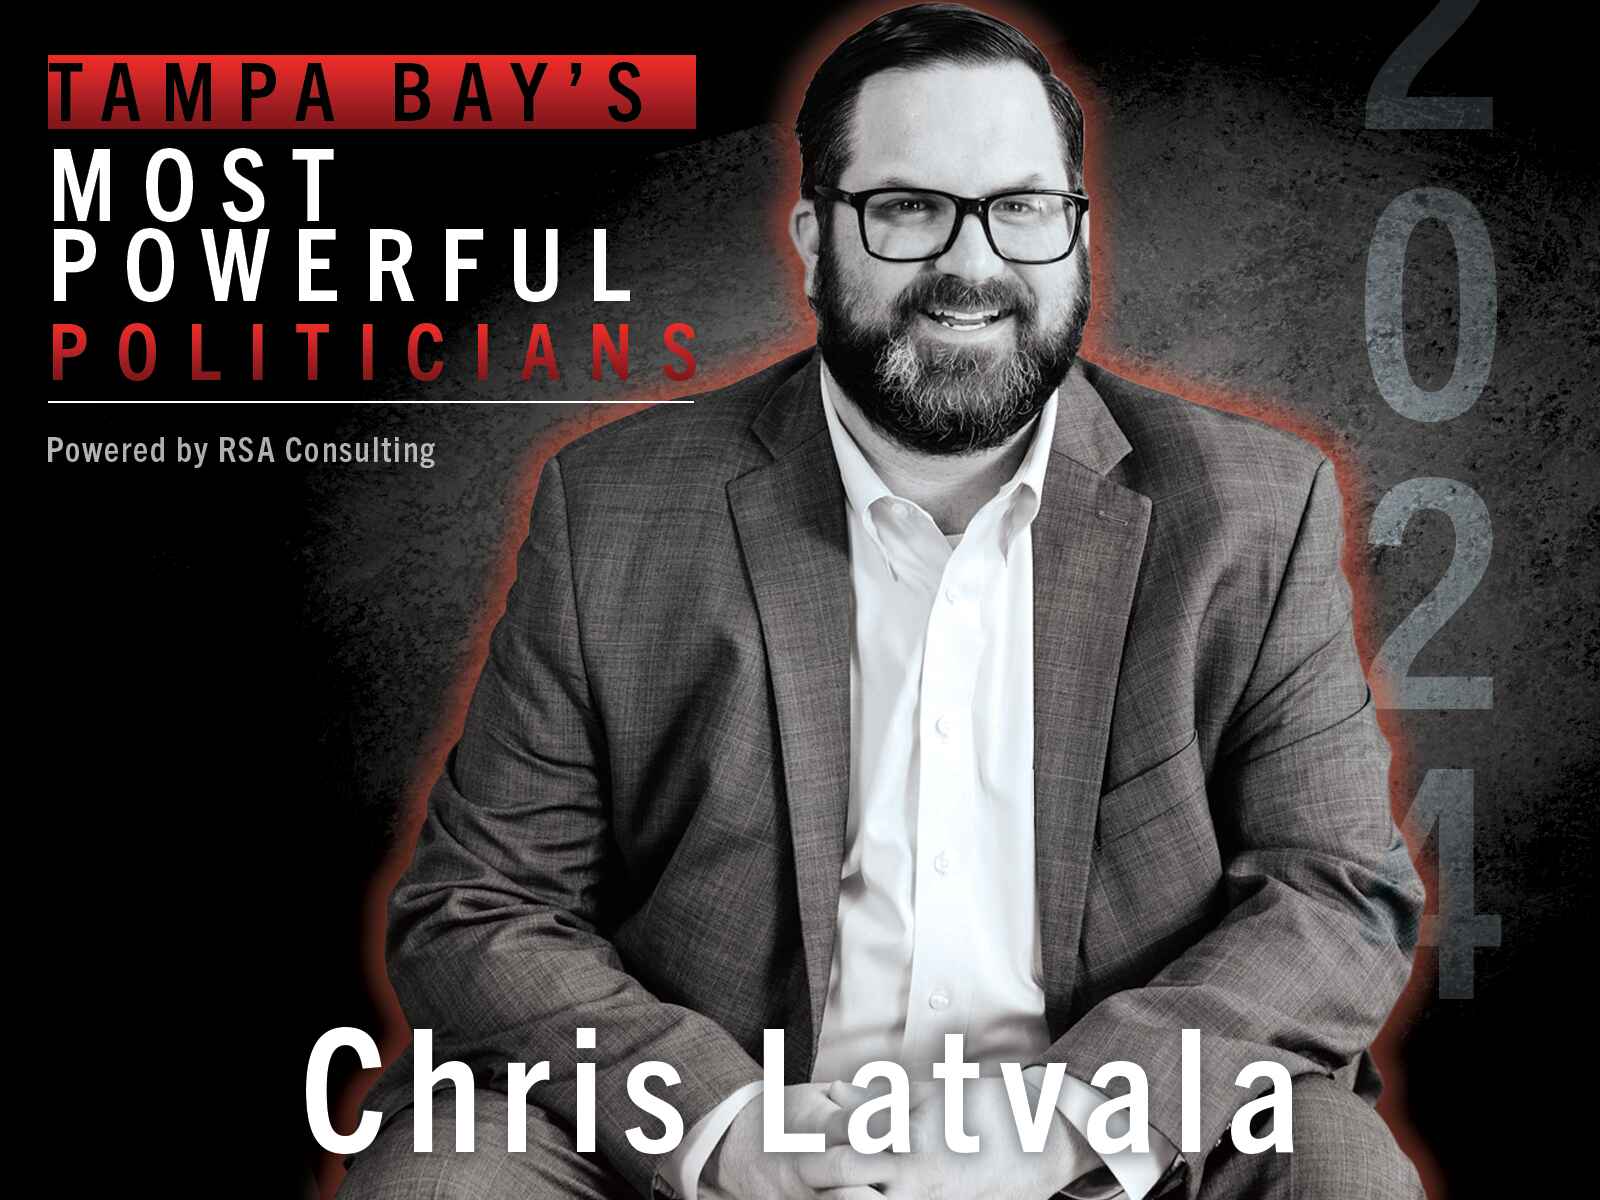 No. 15 on the list of Tampa Bay’s Most Powerful Politicians: Chris Latvala